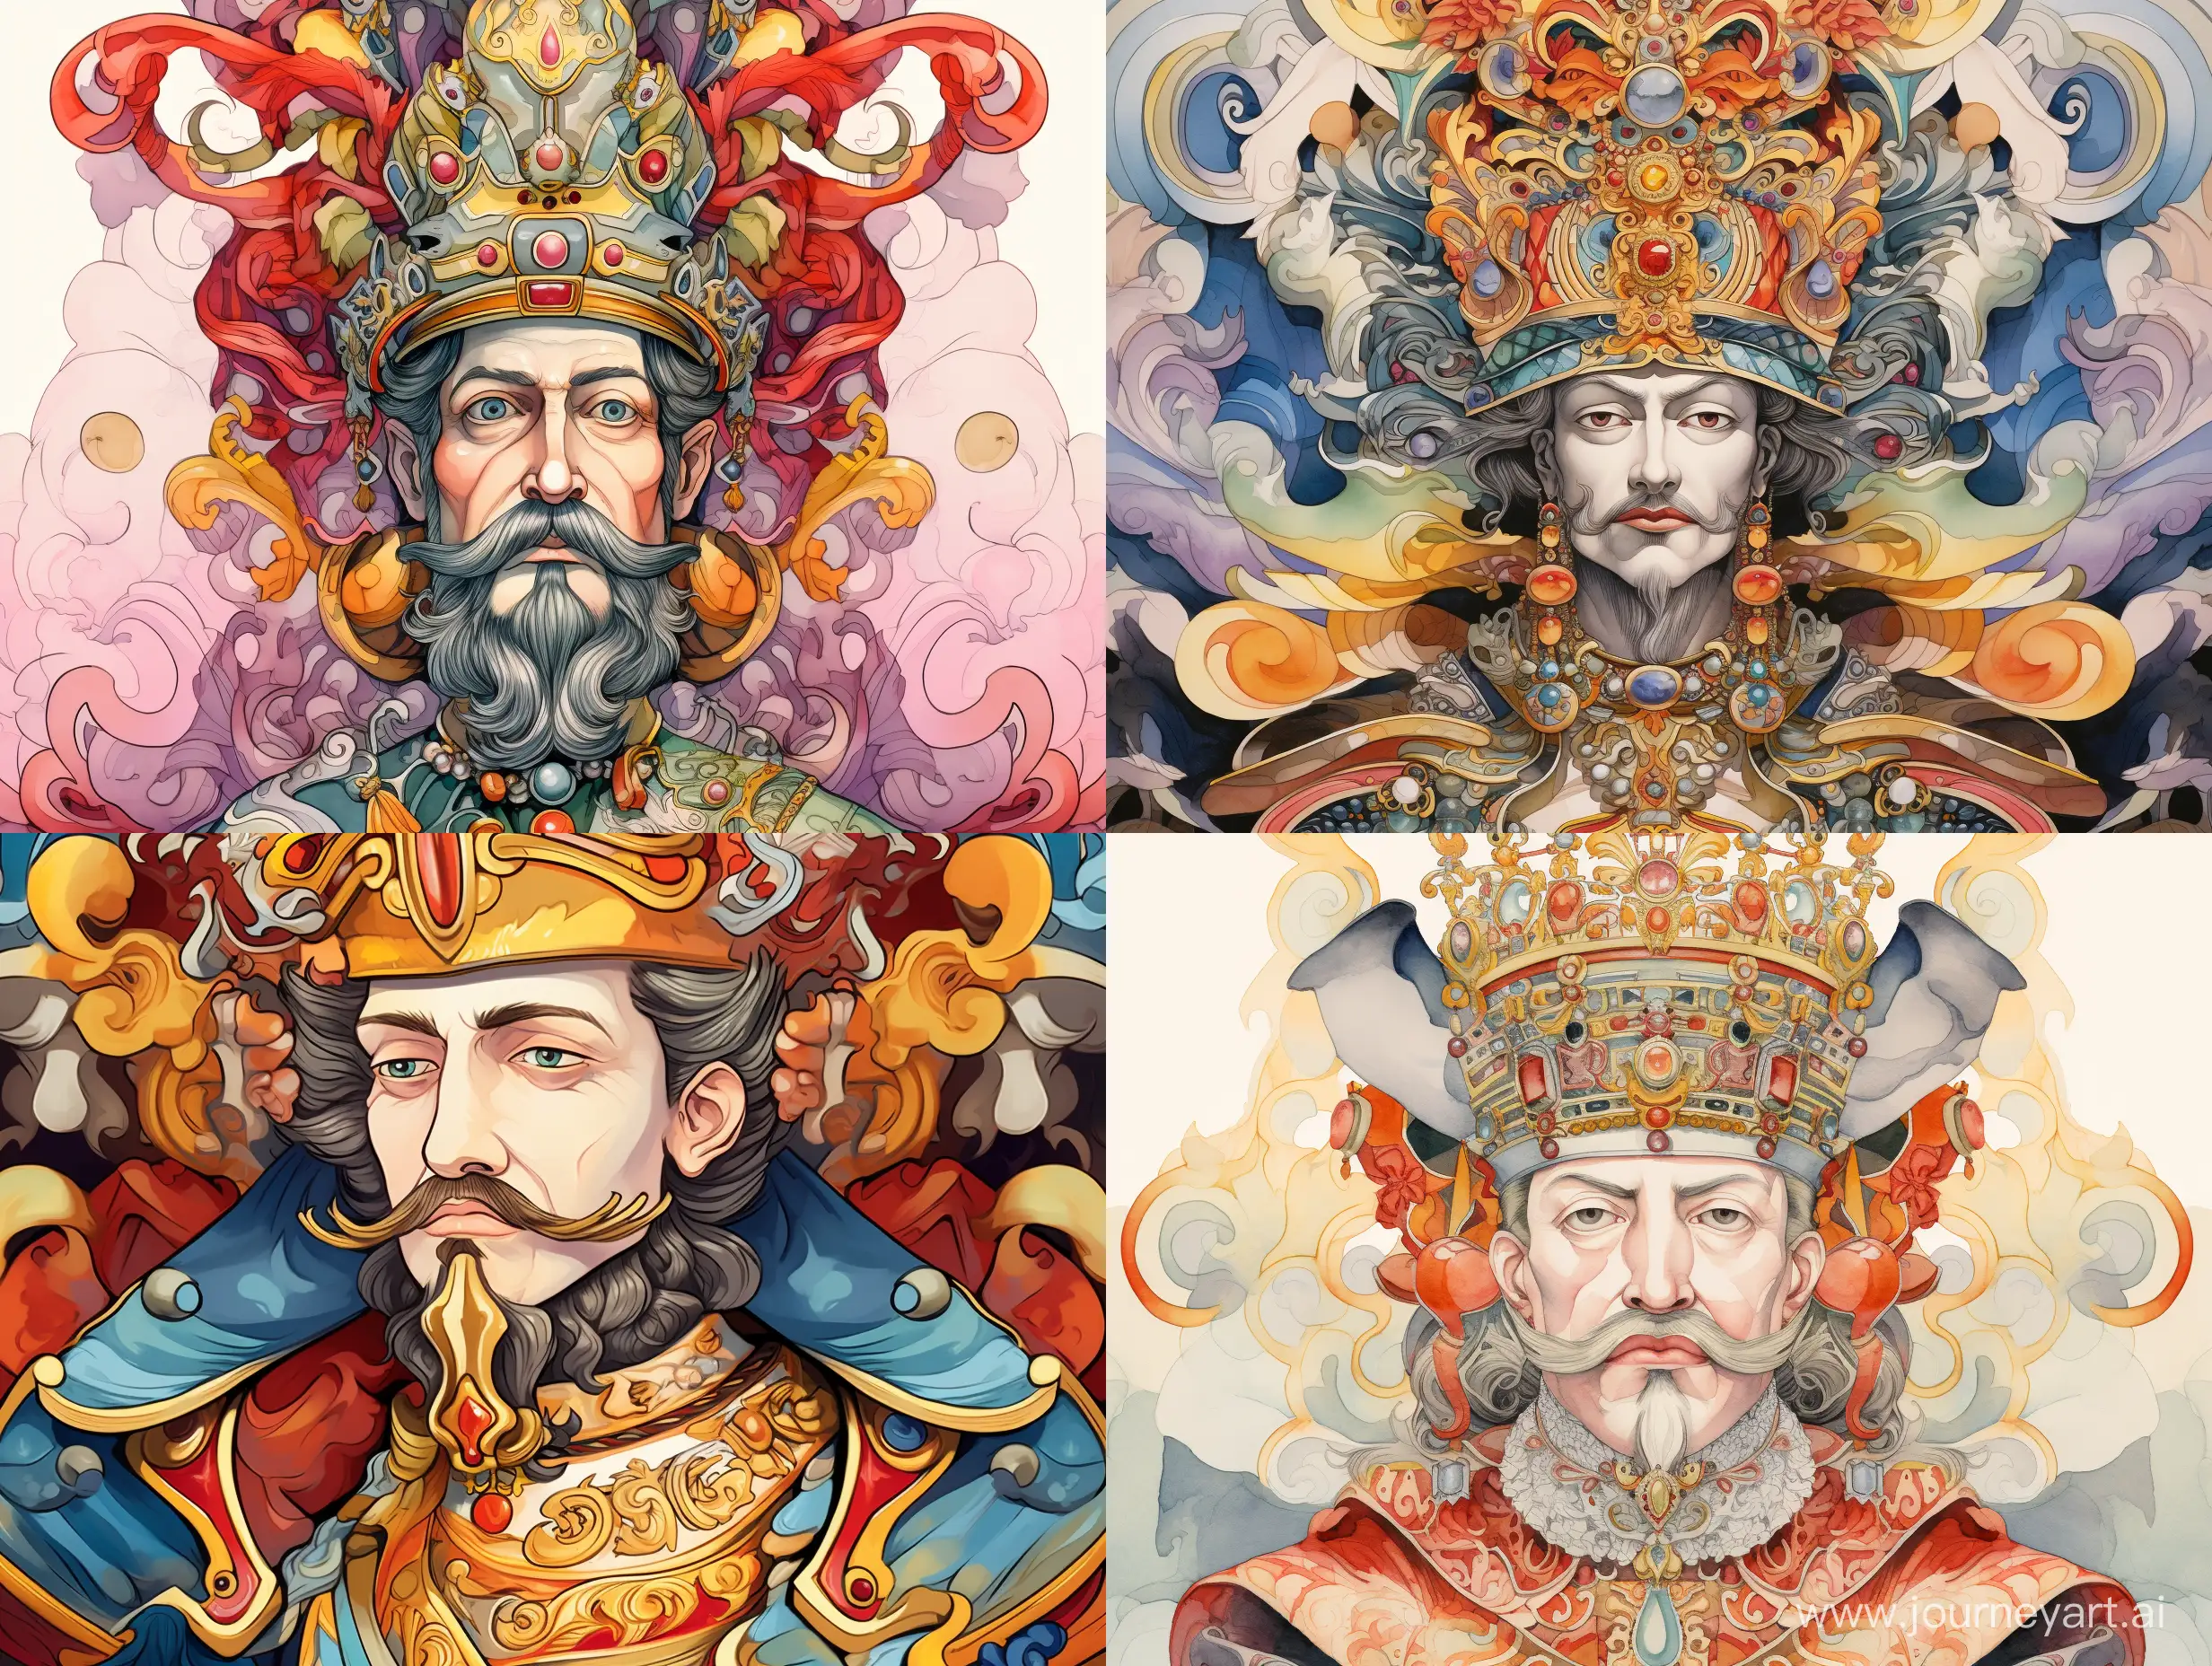 Stylized-Watercolor-Portrait-Ornamental-Rich-King-of-Austria-in-Victor-Ngai-Style